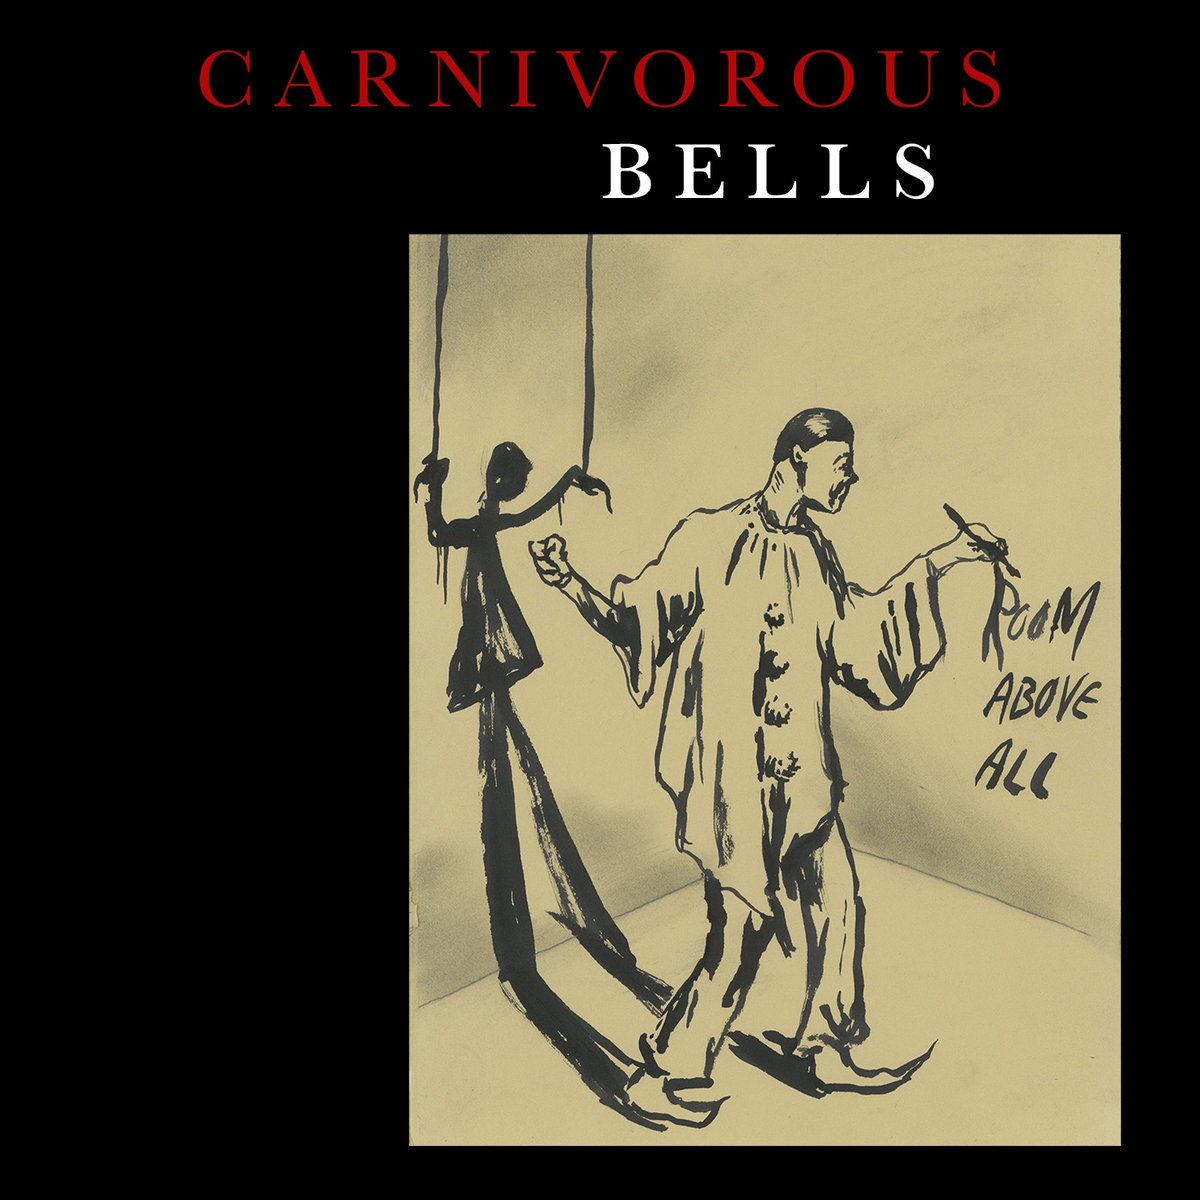 Carnivorous Bells - "Room Above All" - 2023